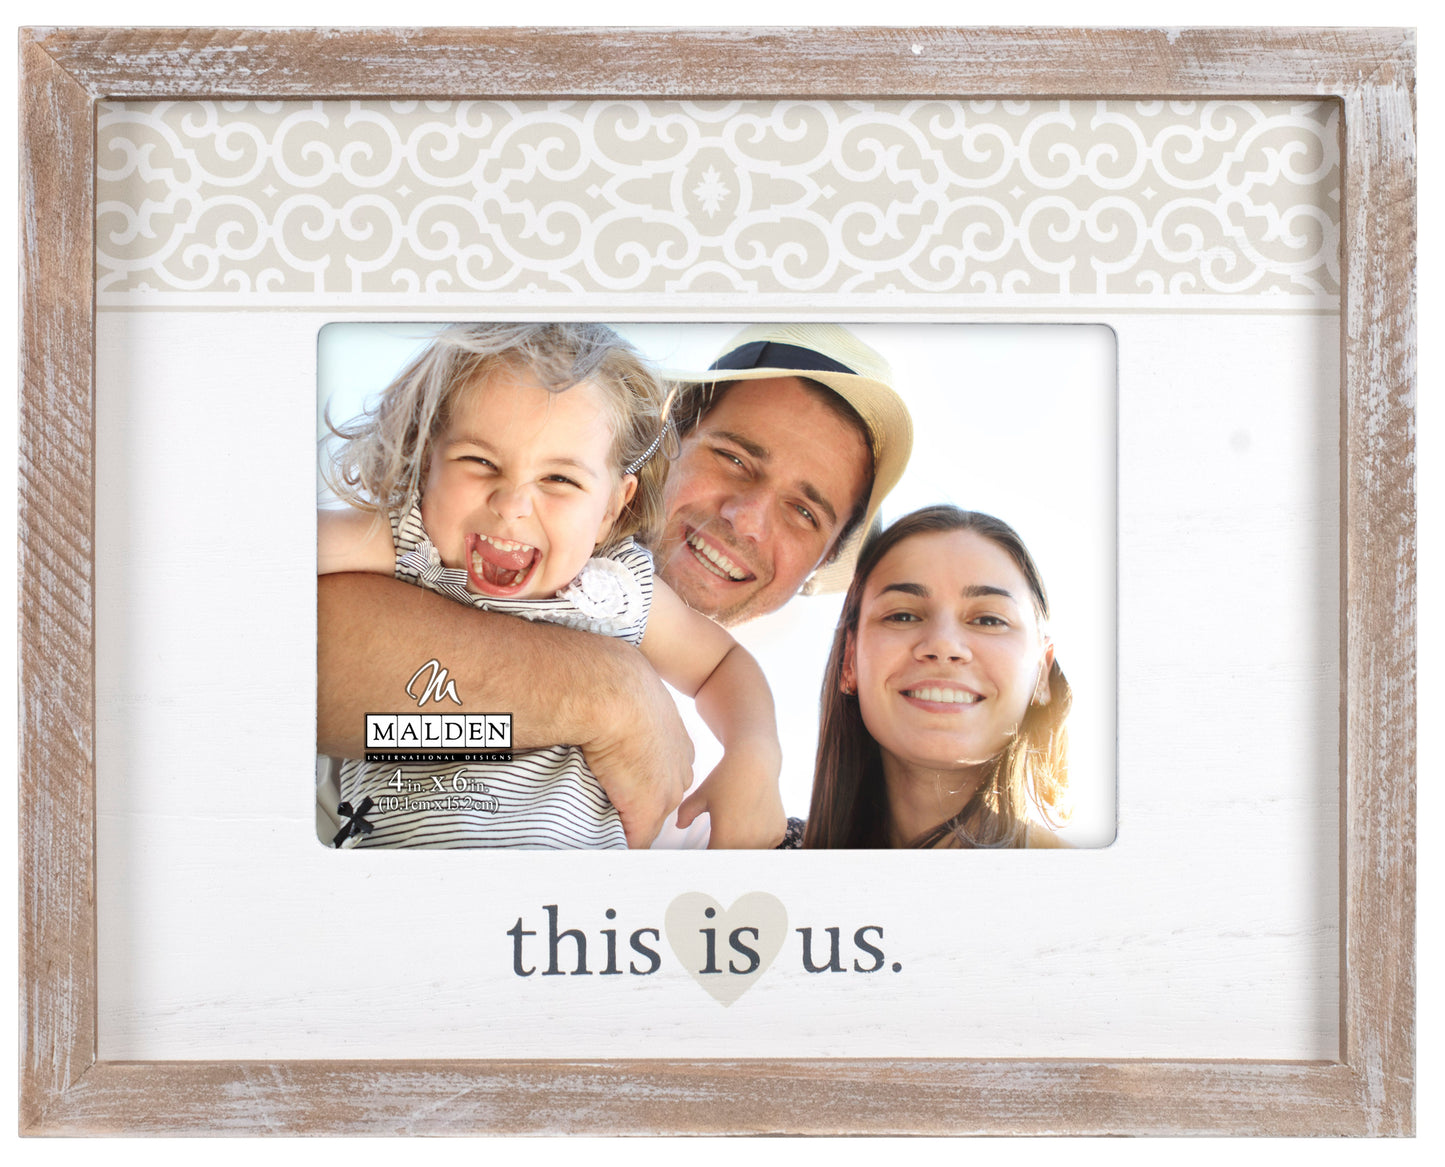 Malden 4x6 "This Is Us" Photo Frame